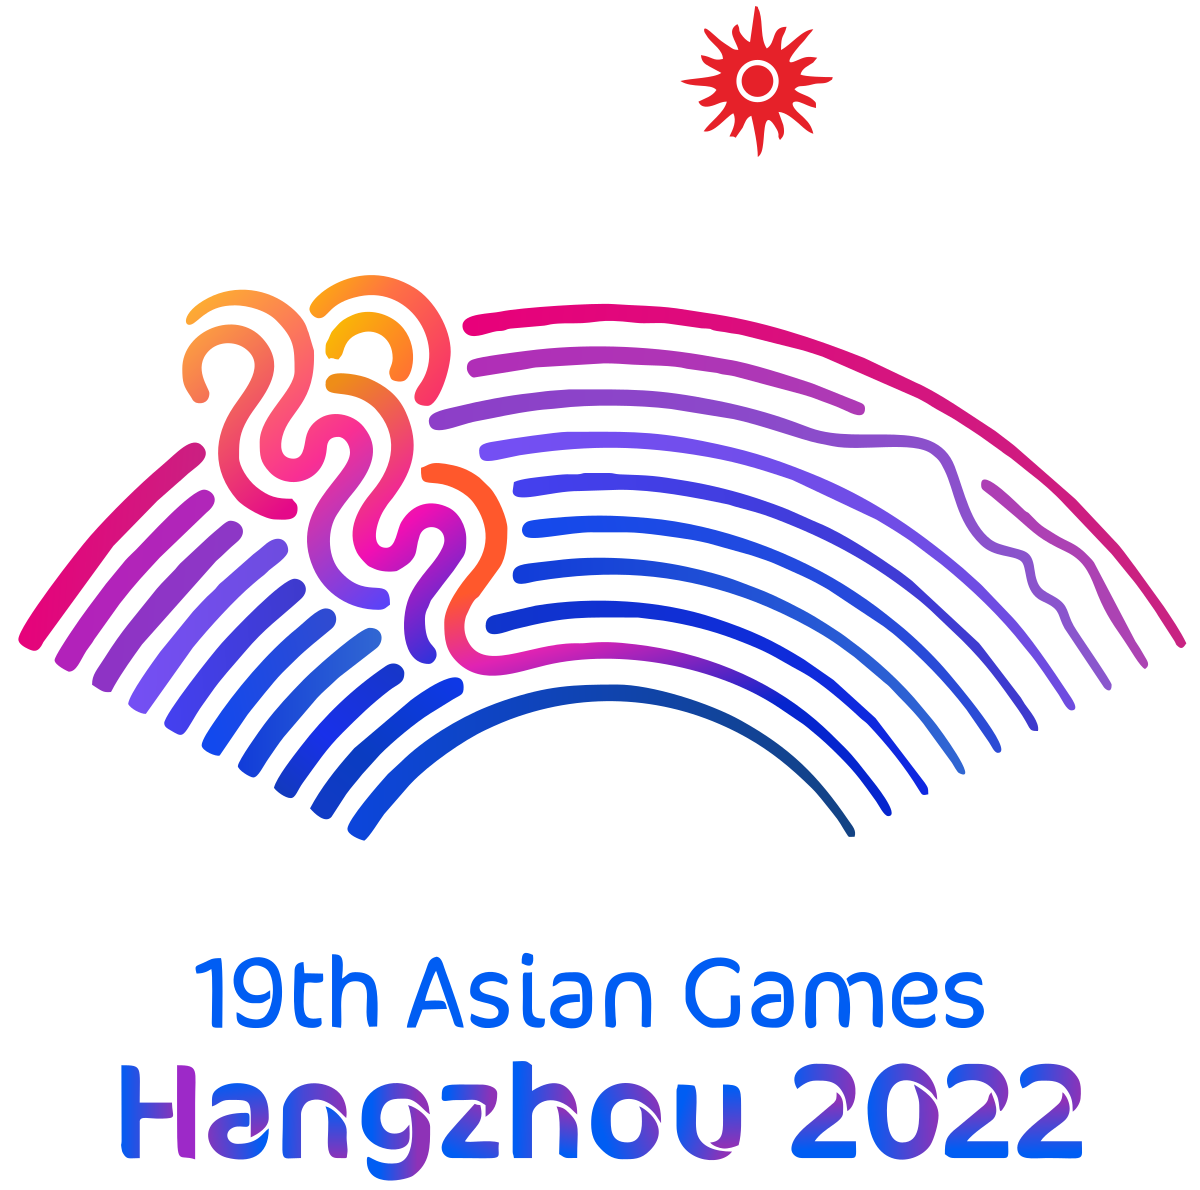 Hangzhou 2022 reveal plans to mark one year to go until Asian Games opening